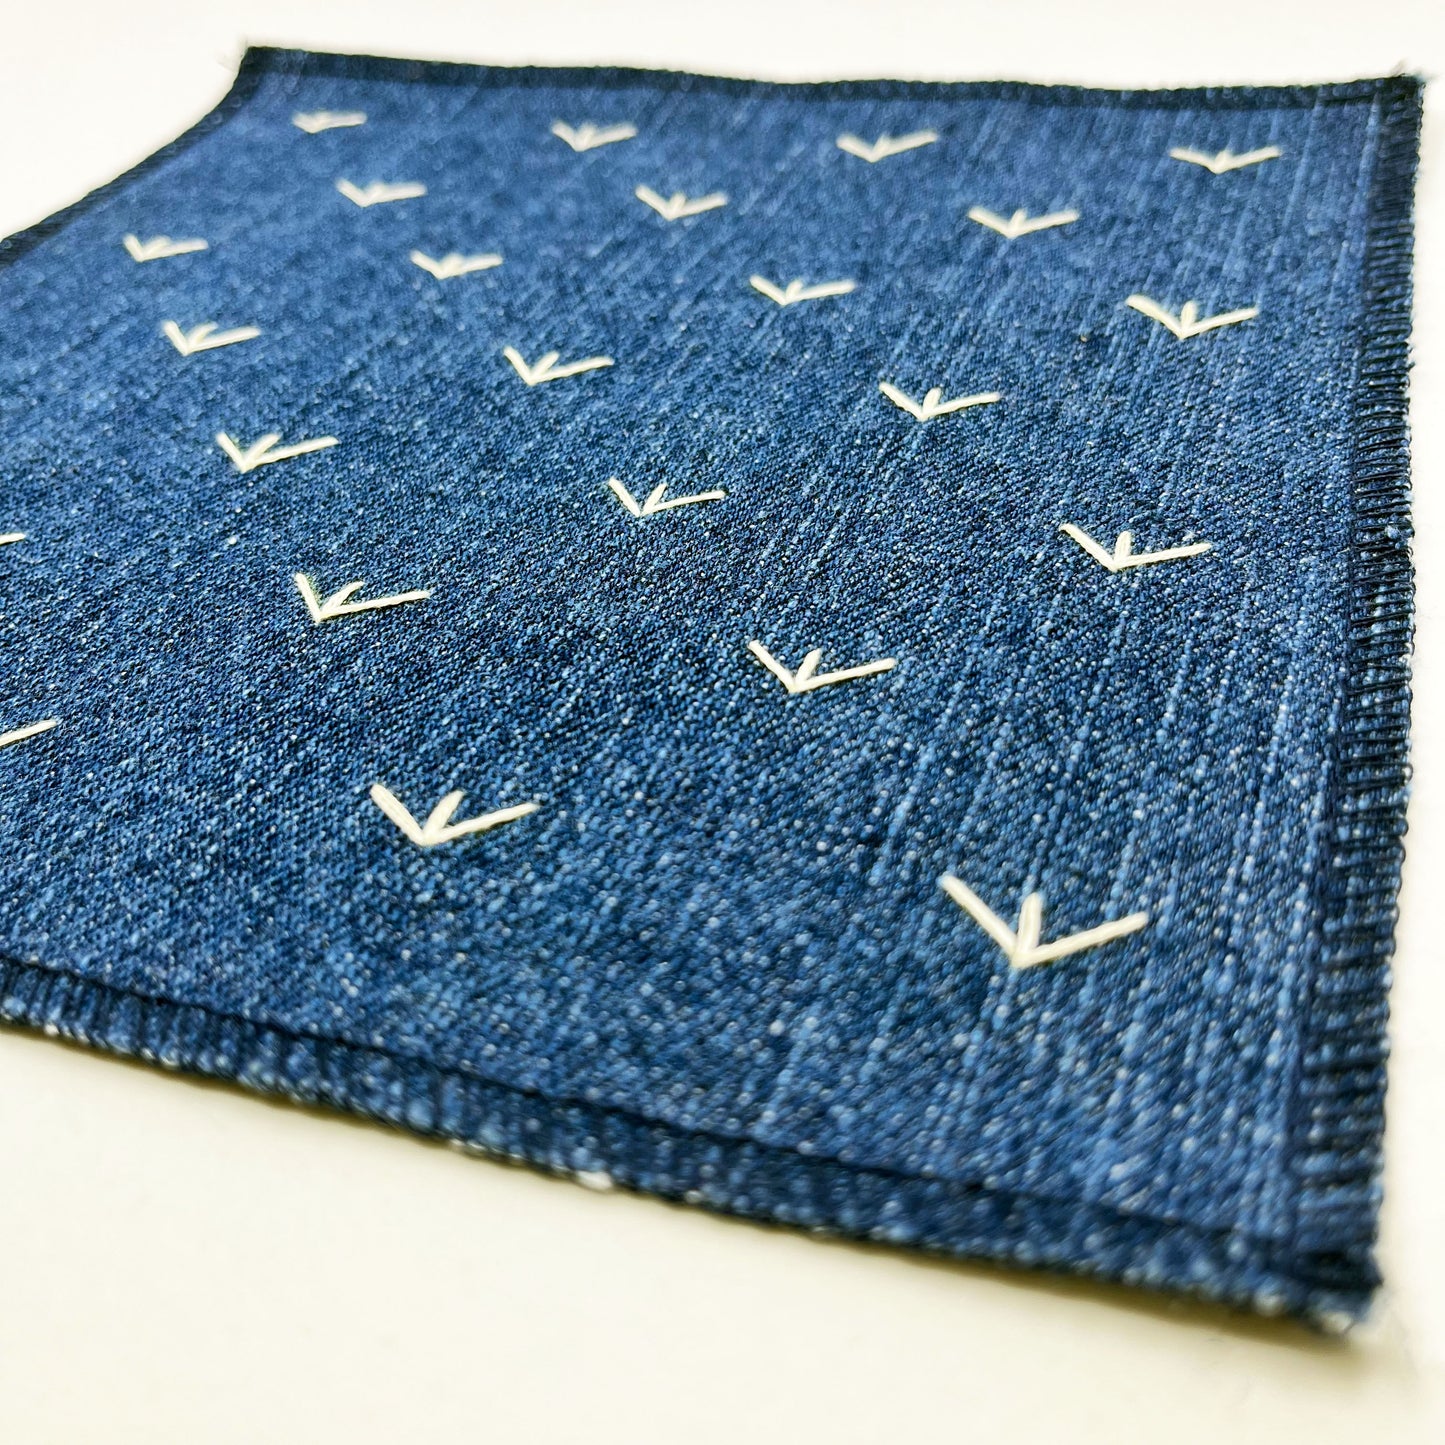 a close up angled view of a square denim patch, with ivory stitches that look like birds feet or sprouts spread out in a diamond pattern, with overlocked edges, on a white background